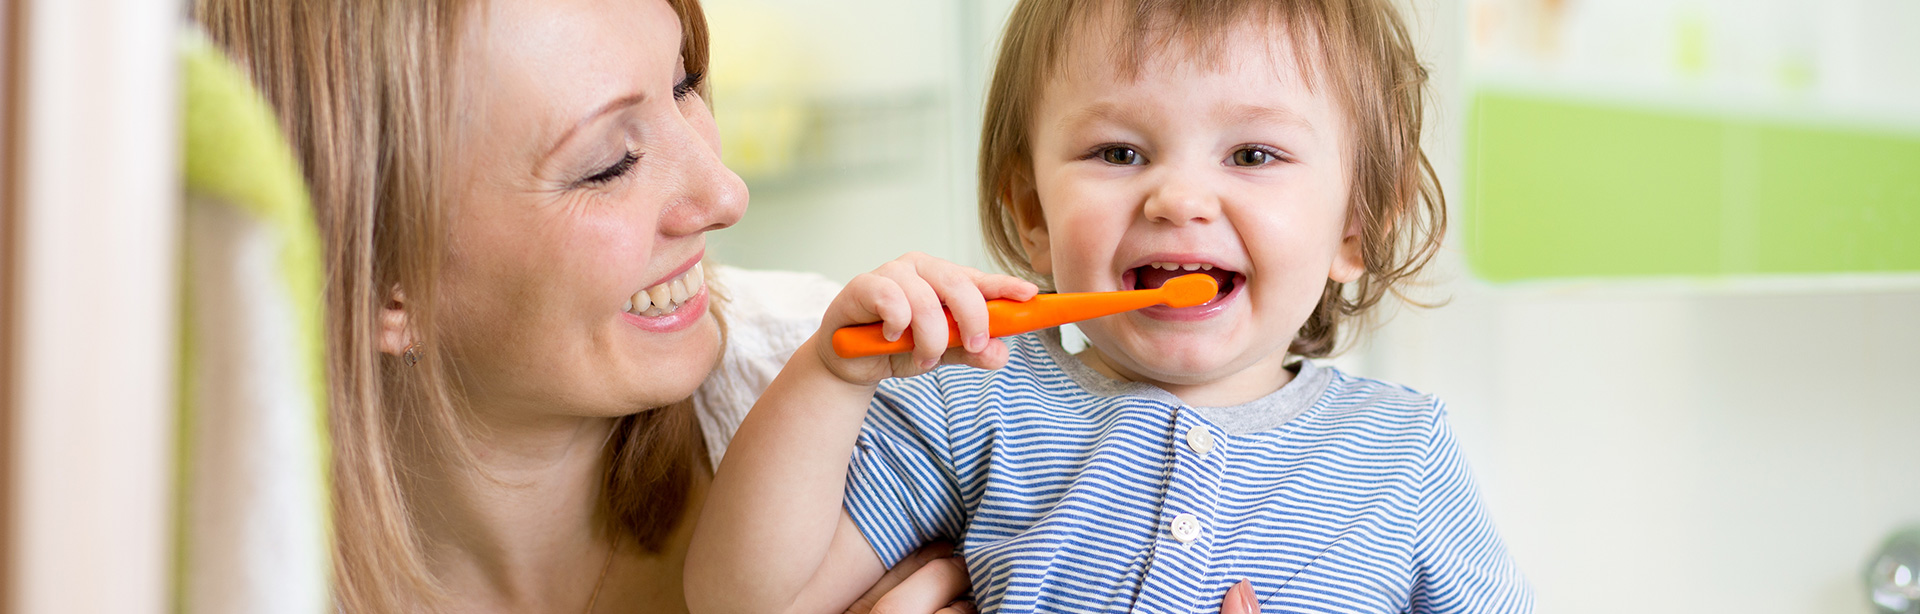 How to Prepare Your Baby for Her First Dental Visit